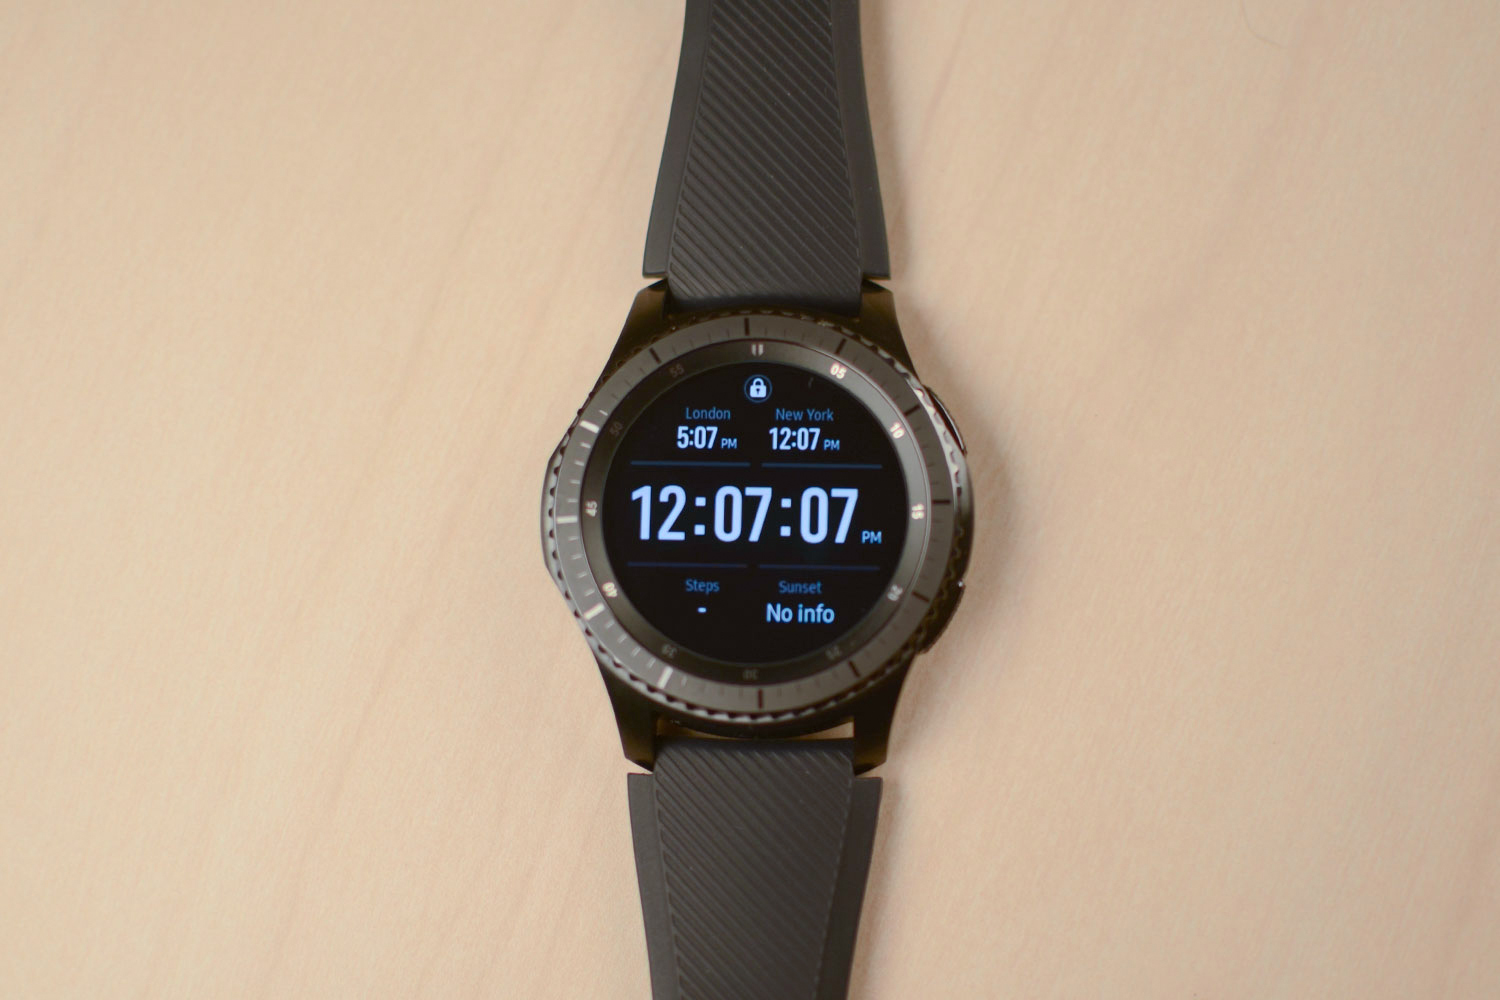 Gear S3 Review: A Great Watch for Android Owners | Digital Trends